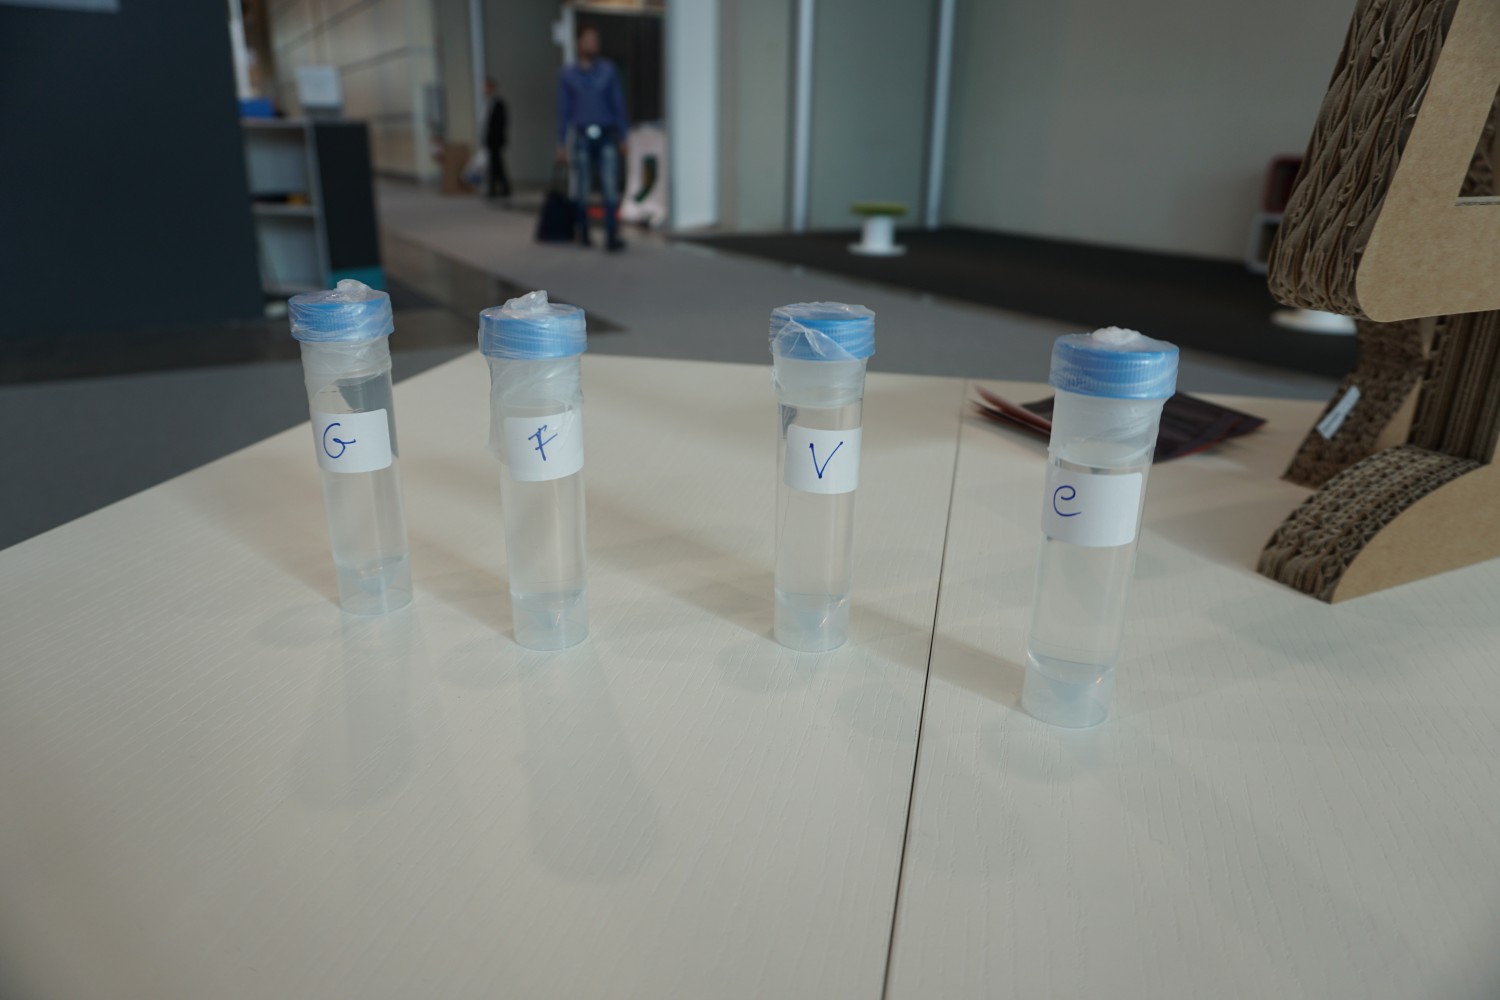 Prepared odour samples for questionnaire